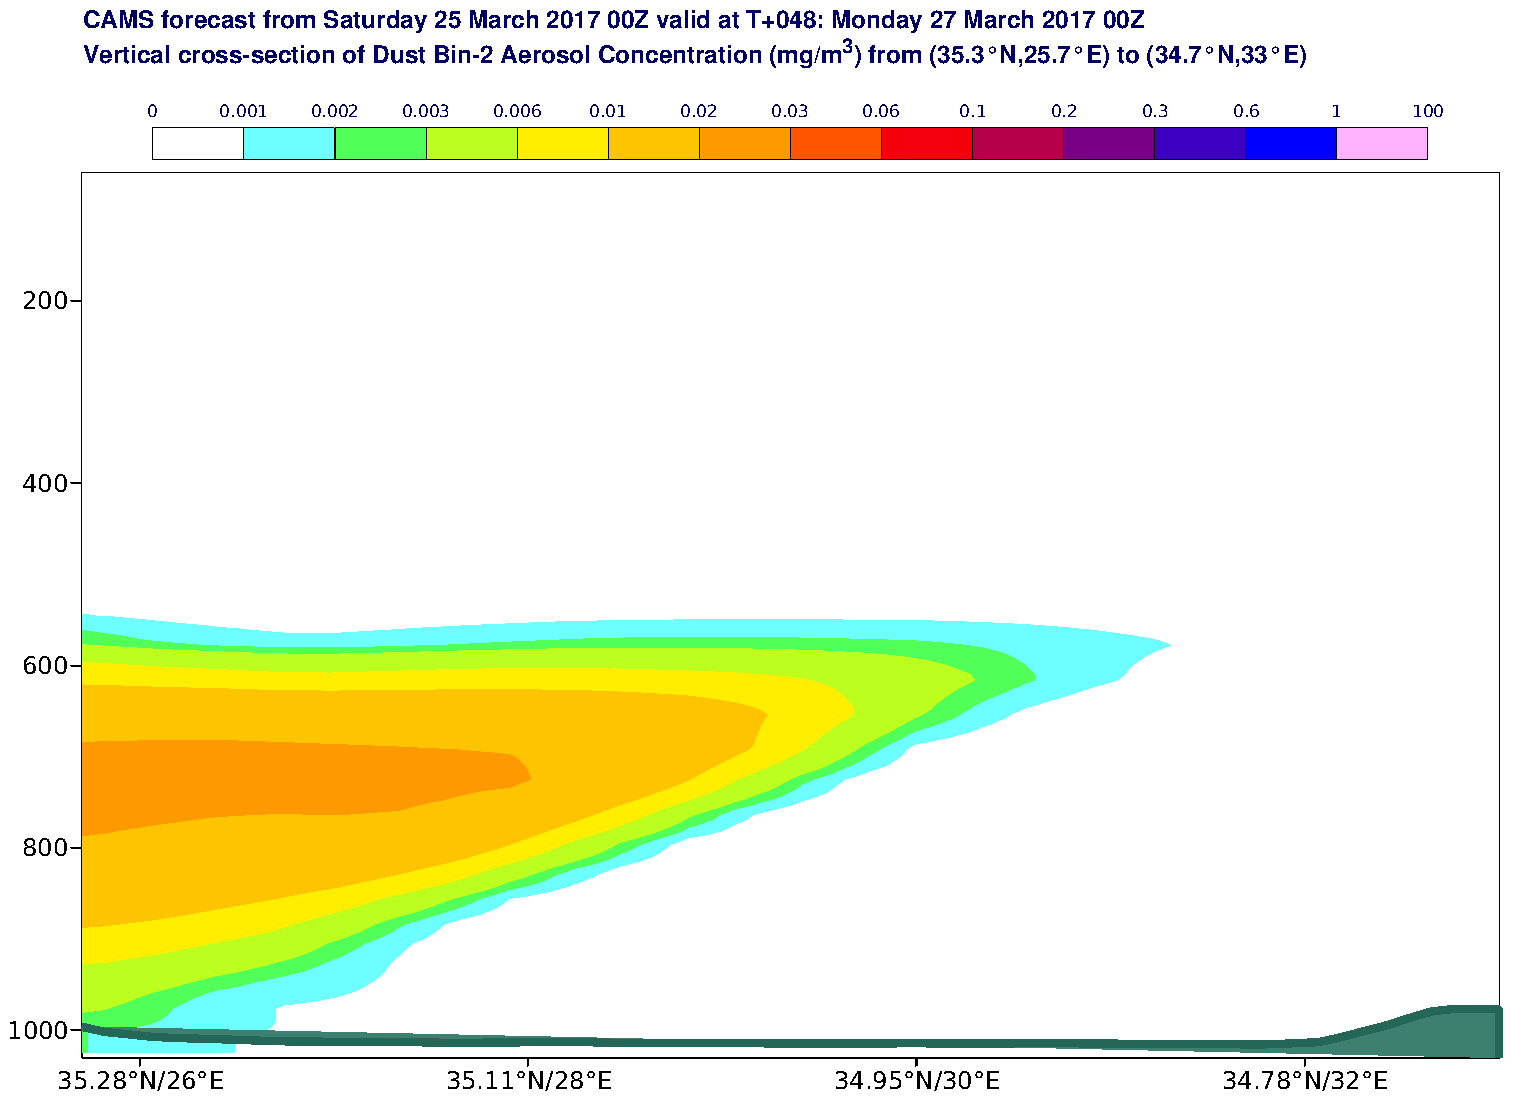 Vertical cross-section of Dust Bin-2 Aerosol Concentration (mg/m3) valid at T48 - 2017-03-27 00:00